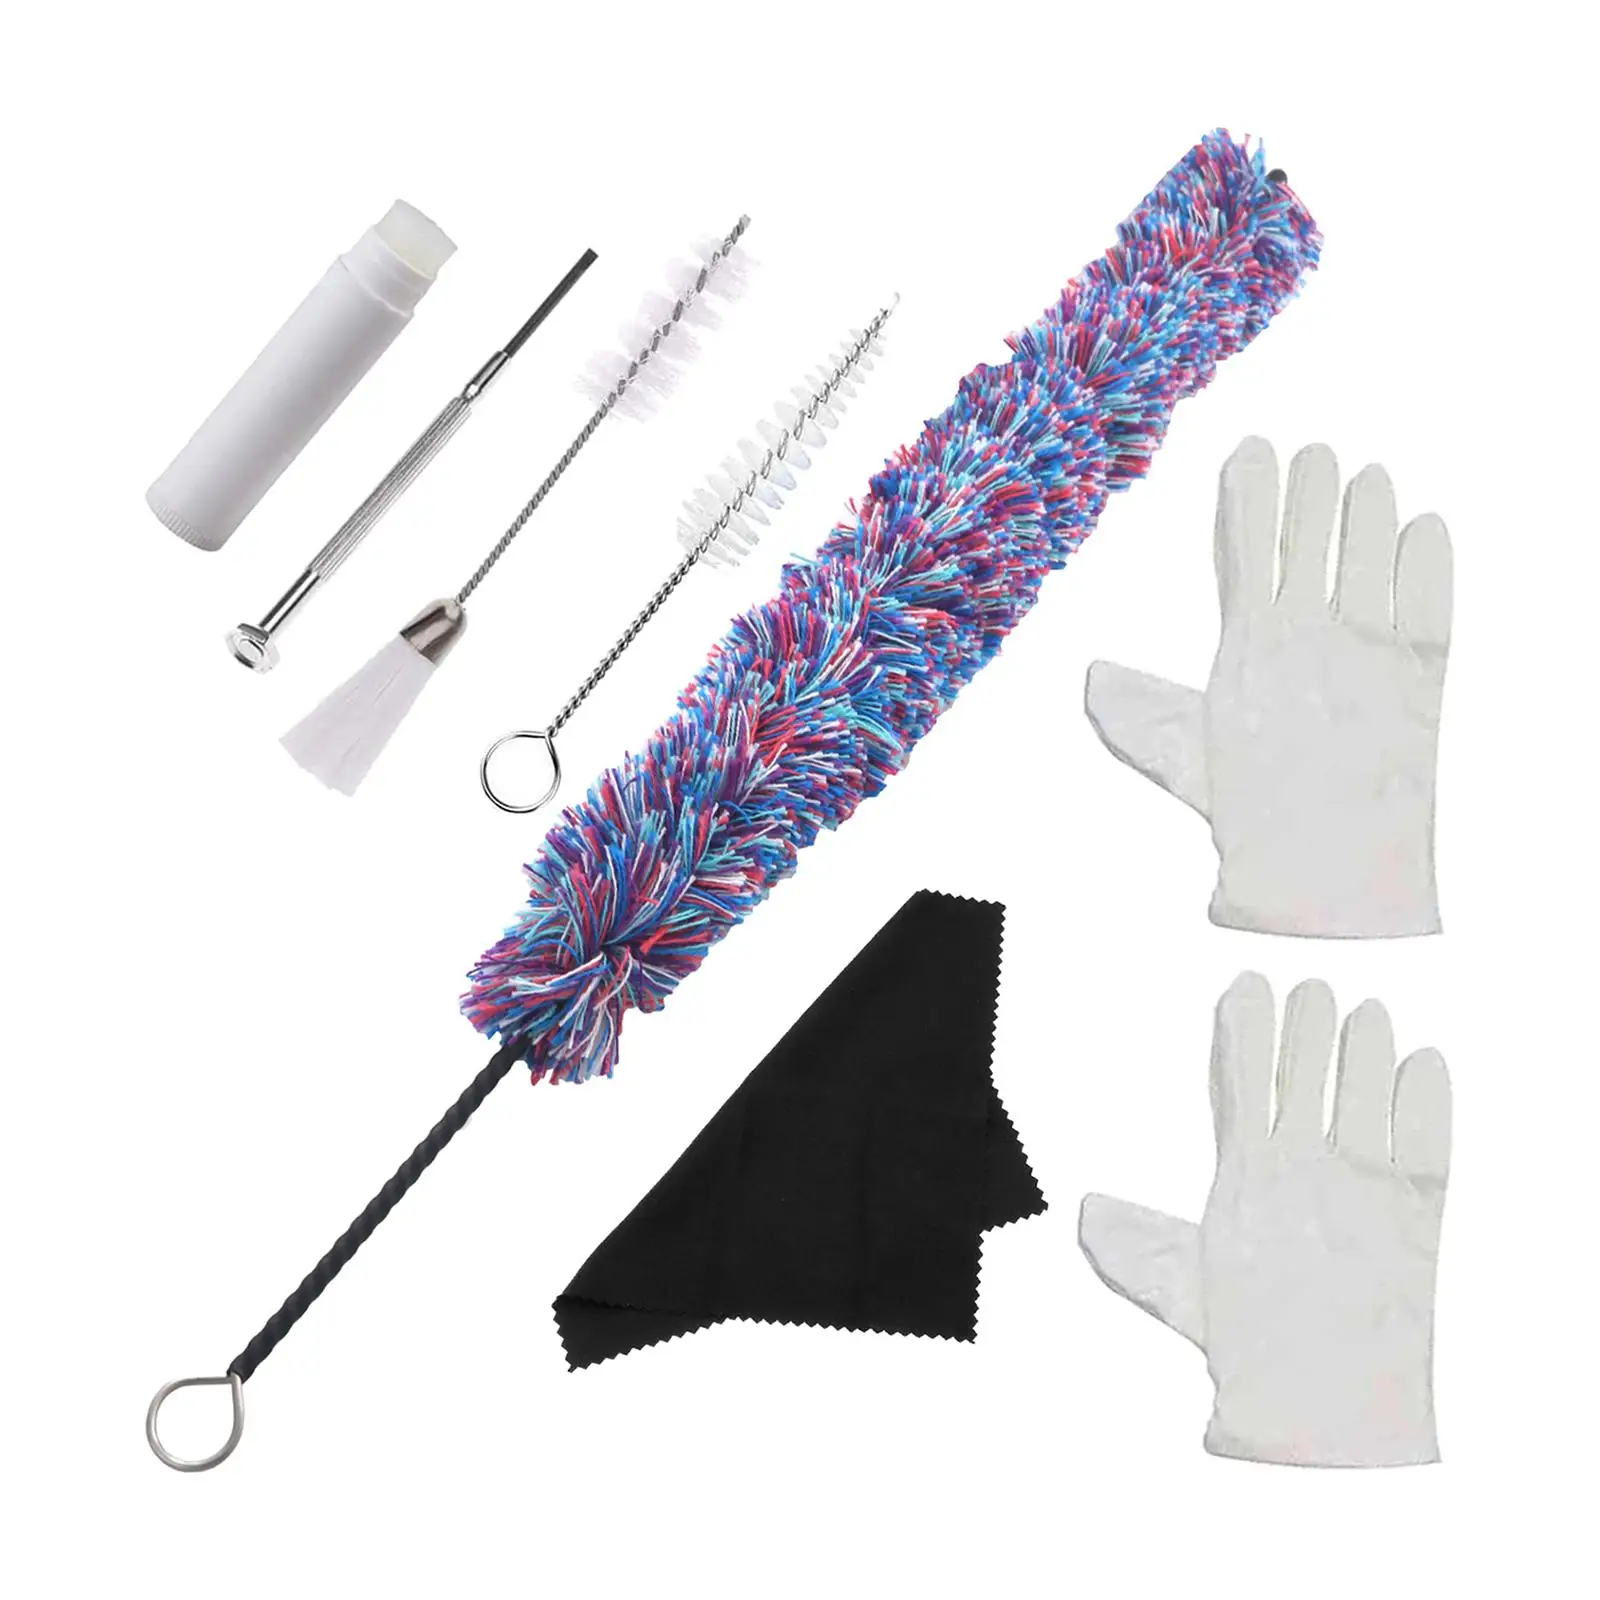  Flute Cleaner Care Cleaning Kit, Maintenance Kit, Cork ,Swab,Cleaning Cloth,Cleaning Brush,Cleaning Rod,and Gloves Set